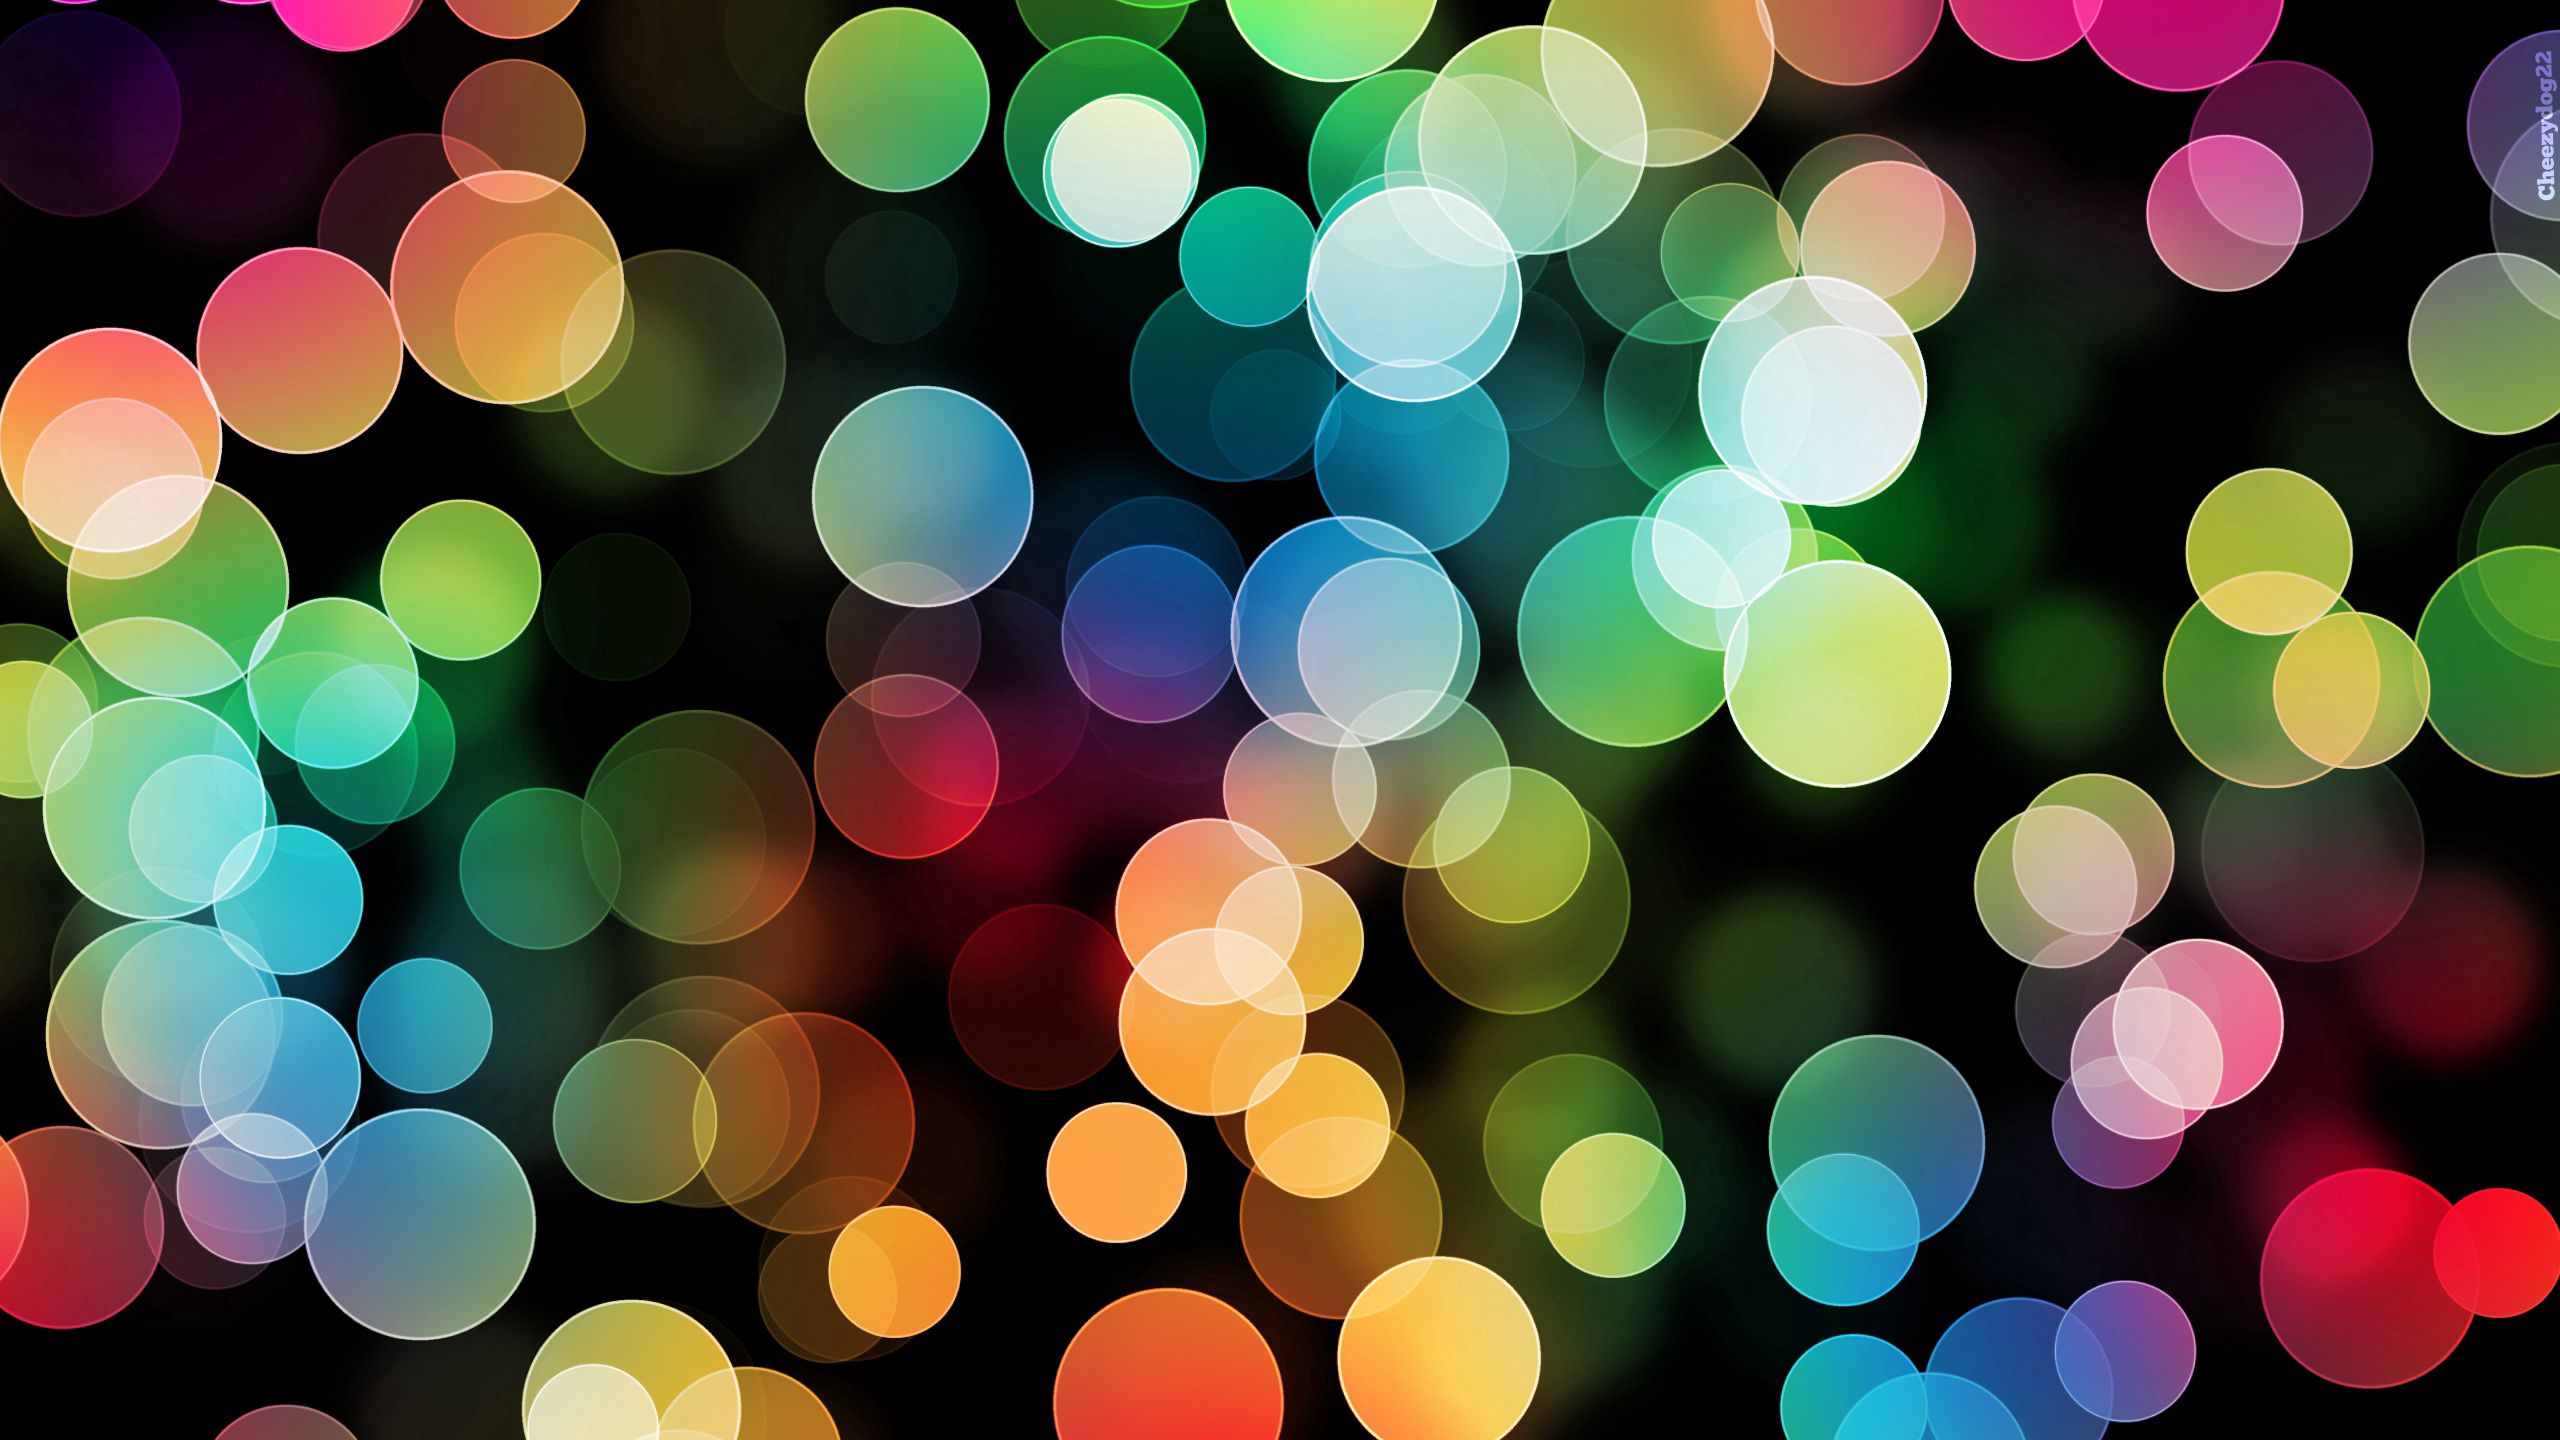 vertical wallpaper colourful, shine, colorful, abstract, glare, circles, light, lots of, multitude